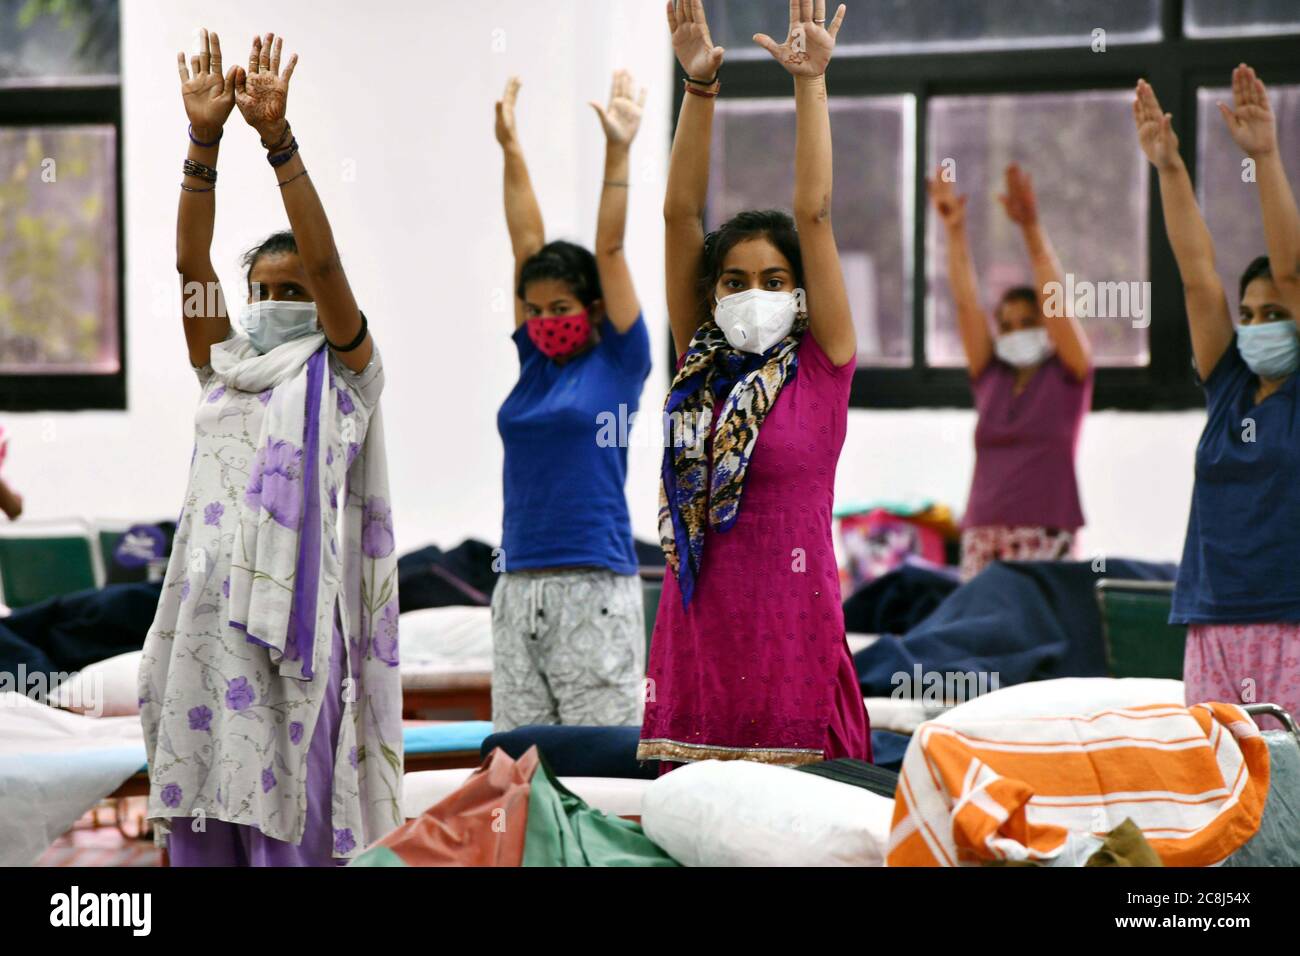 (200725) -- NEW DELHI, July 25, 2020 (Xinhua) -- Patients do yoga at a COVID-19 care center in New Delhi, India, July 24, 2020. India's health ministry said on Saturday morning that 757 new deaths due to COVID-19, besides fresh 48,916 positive cases, were reported during the past 24 hours across the country, taking the number of deaths to 31,358 and total cases to 1,336,861. (Photo by Partha Sarkar/Xinhua) Stock Photo